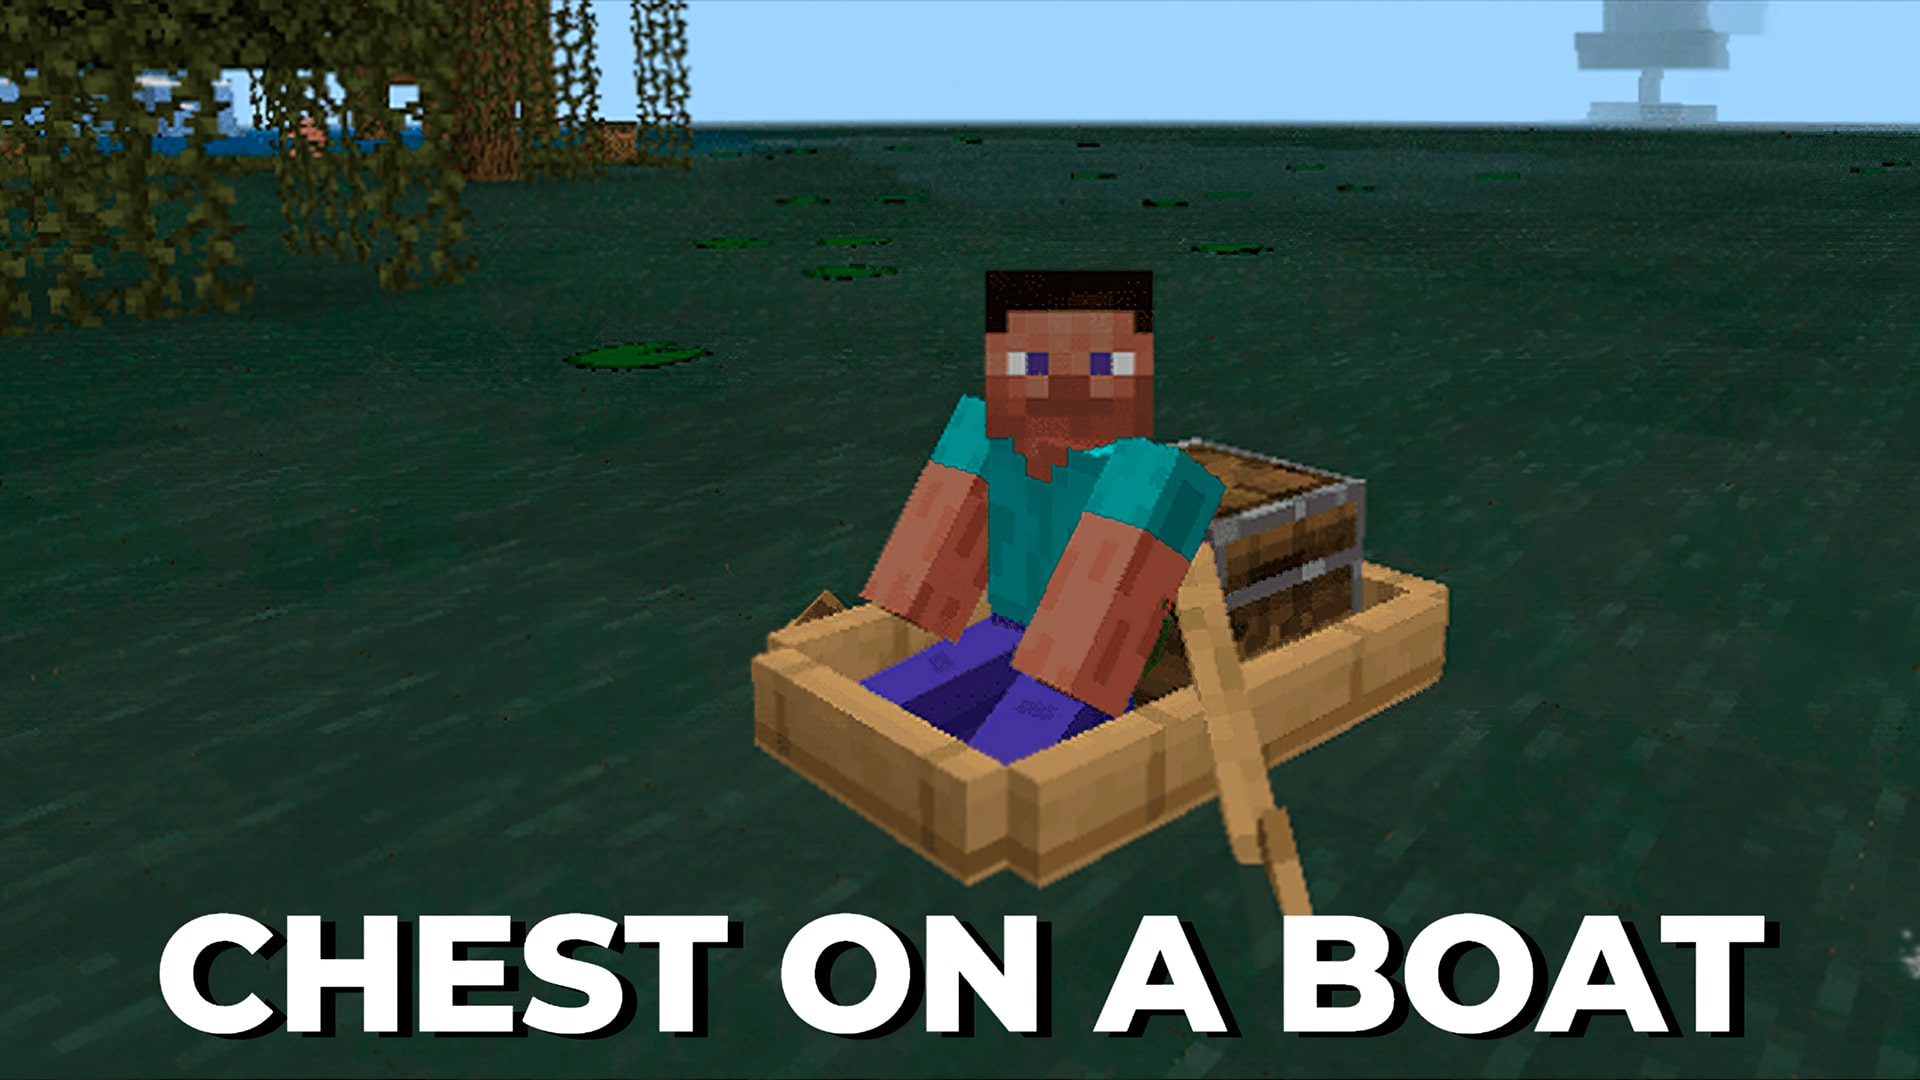 Chest on a boat